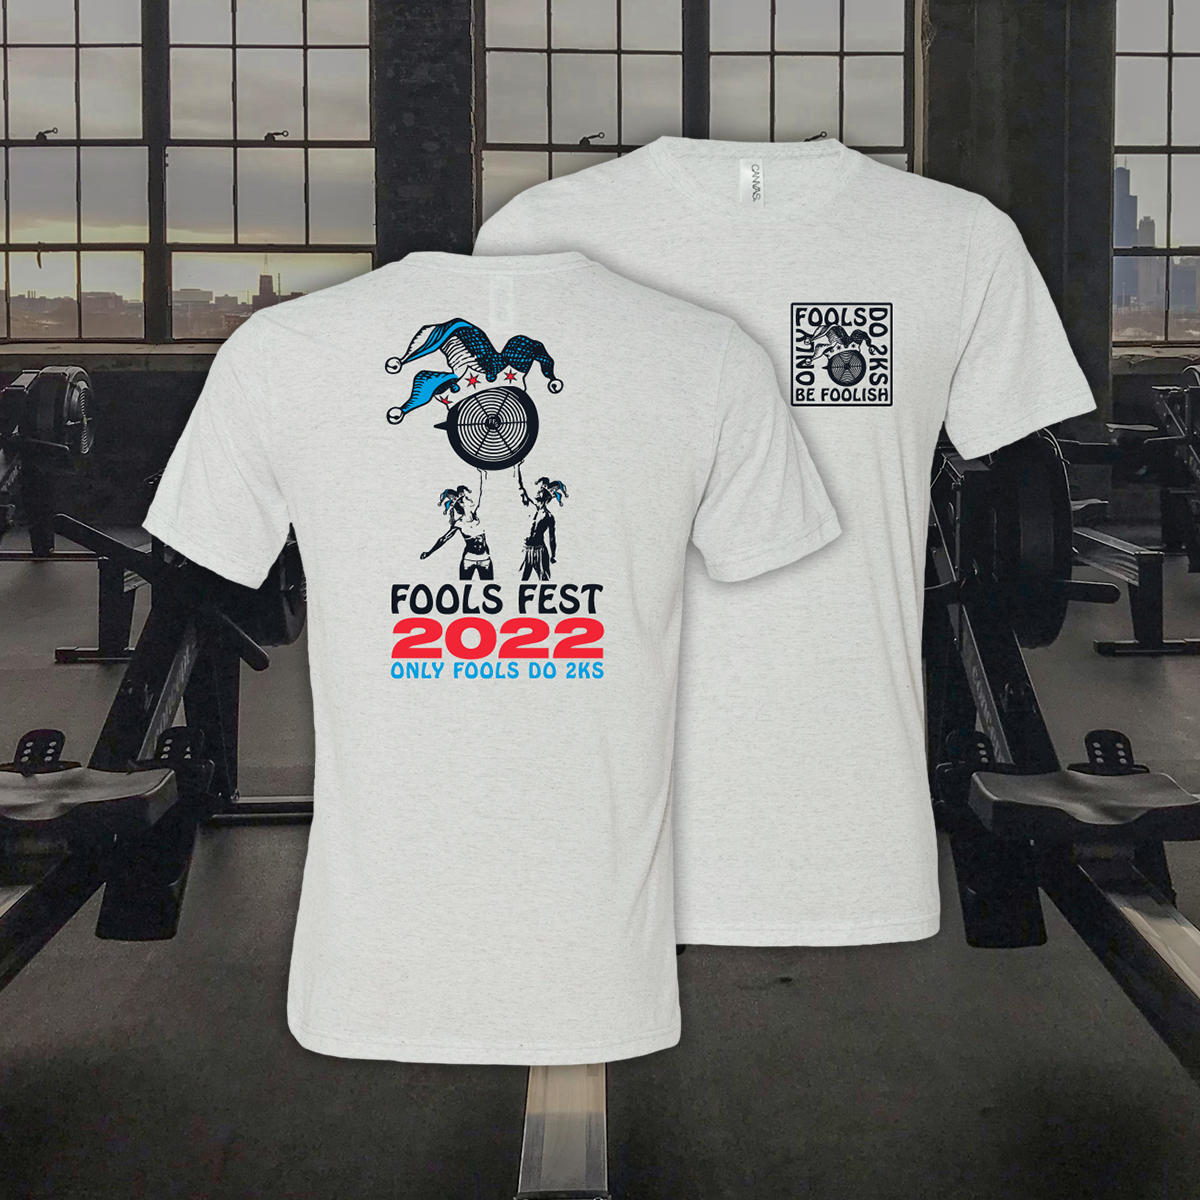 Fools Fest Sprints 2022 official triblend race tee.